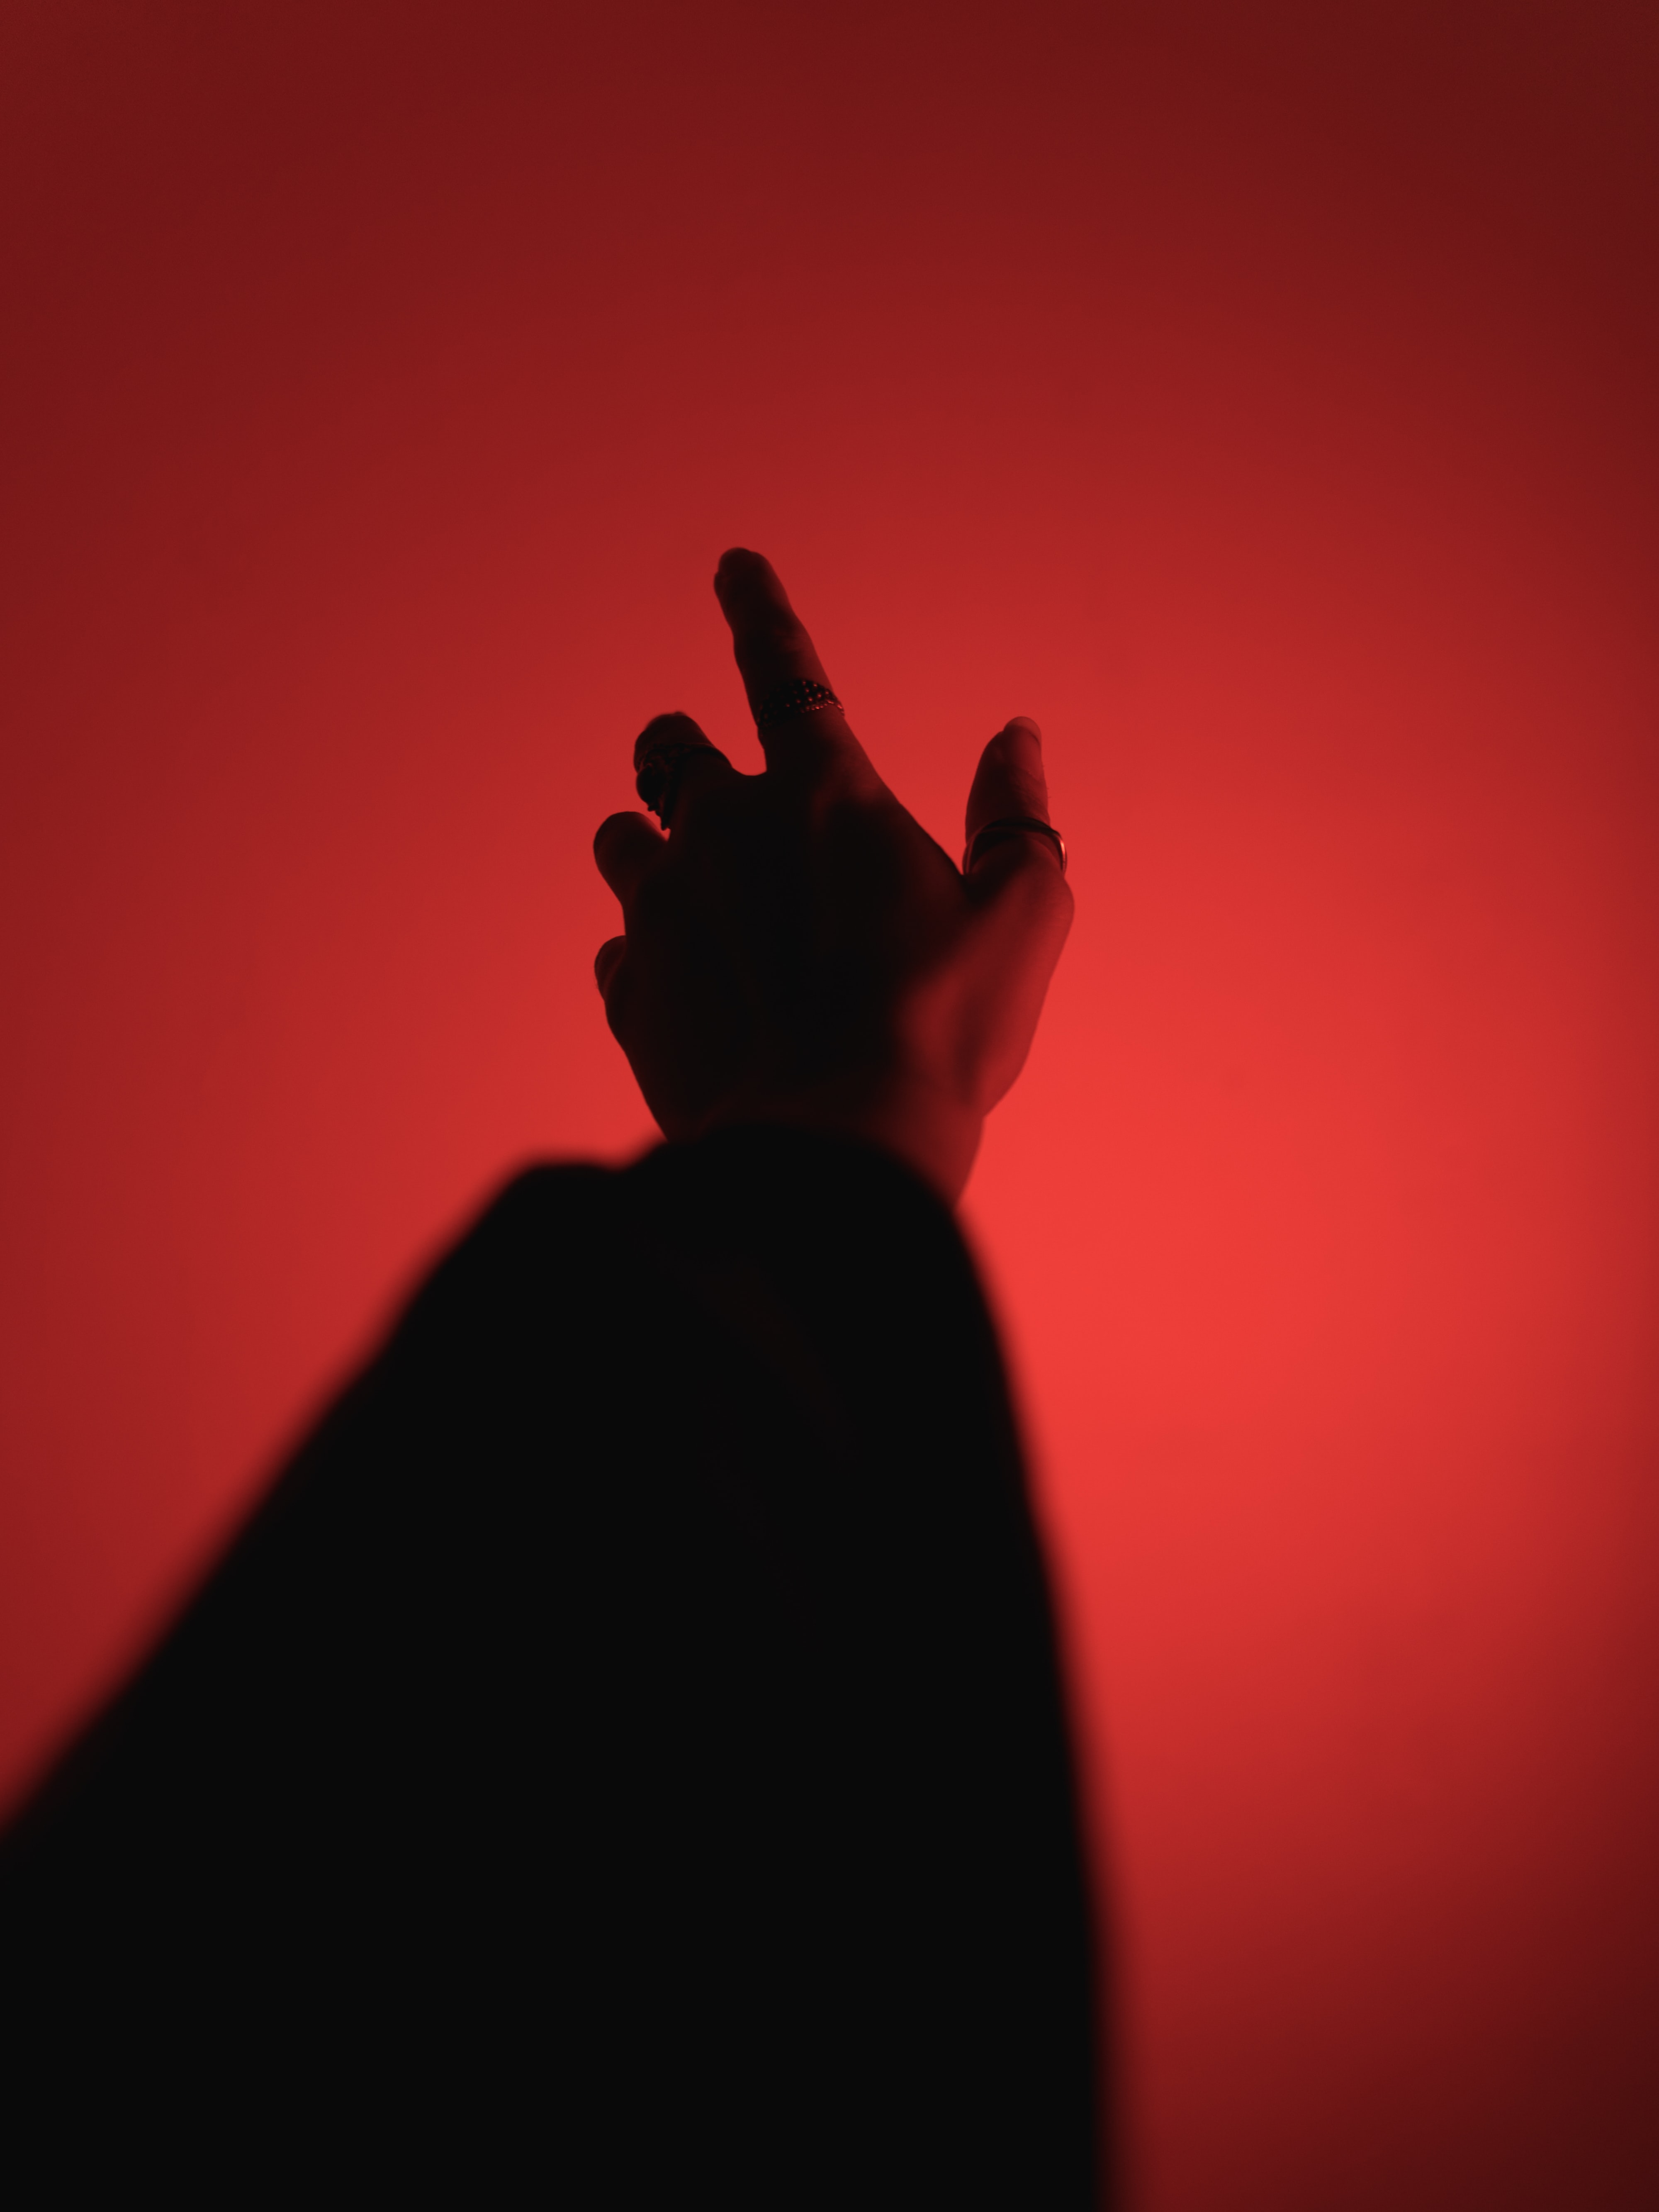 red, dark, hand, miscellanea, miscellaneous, fingers, touching, touch